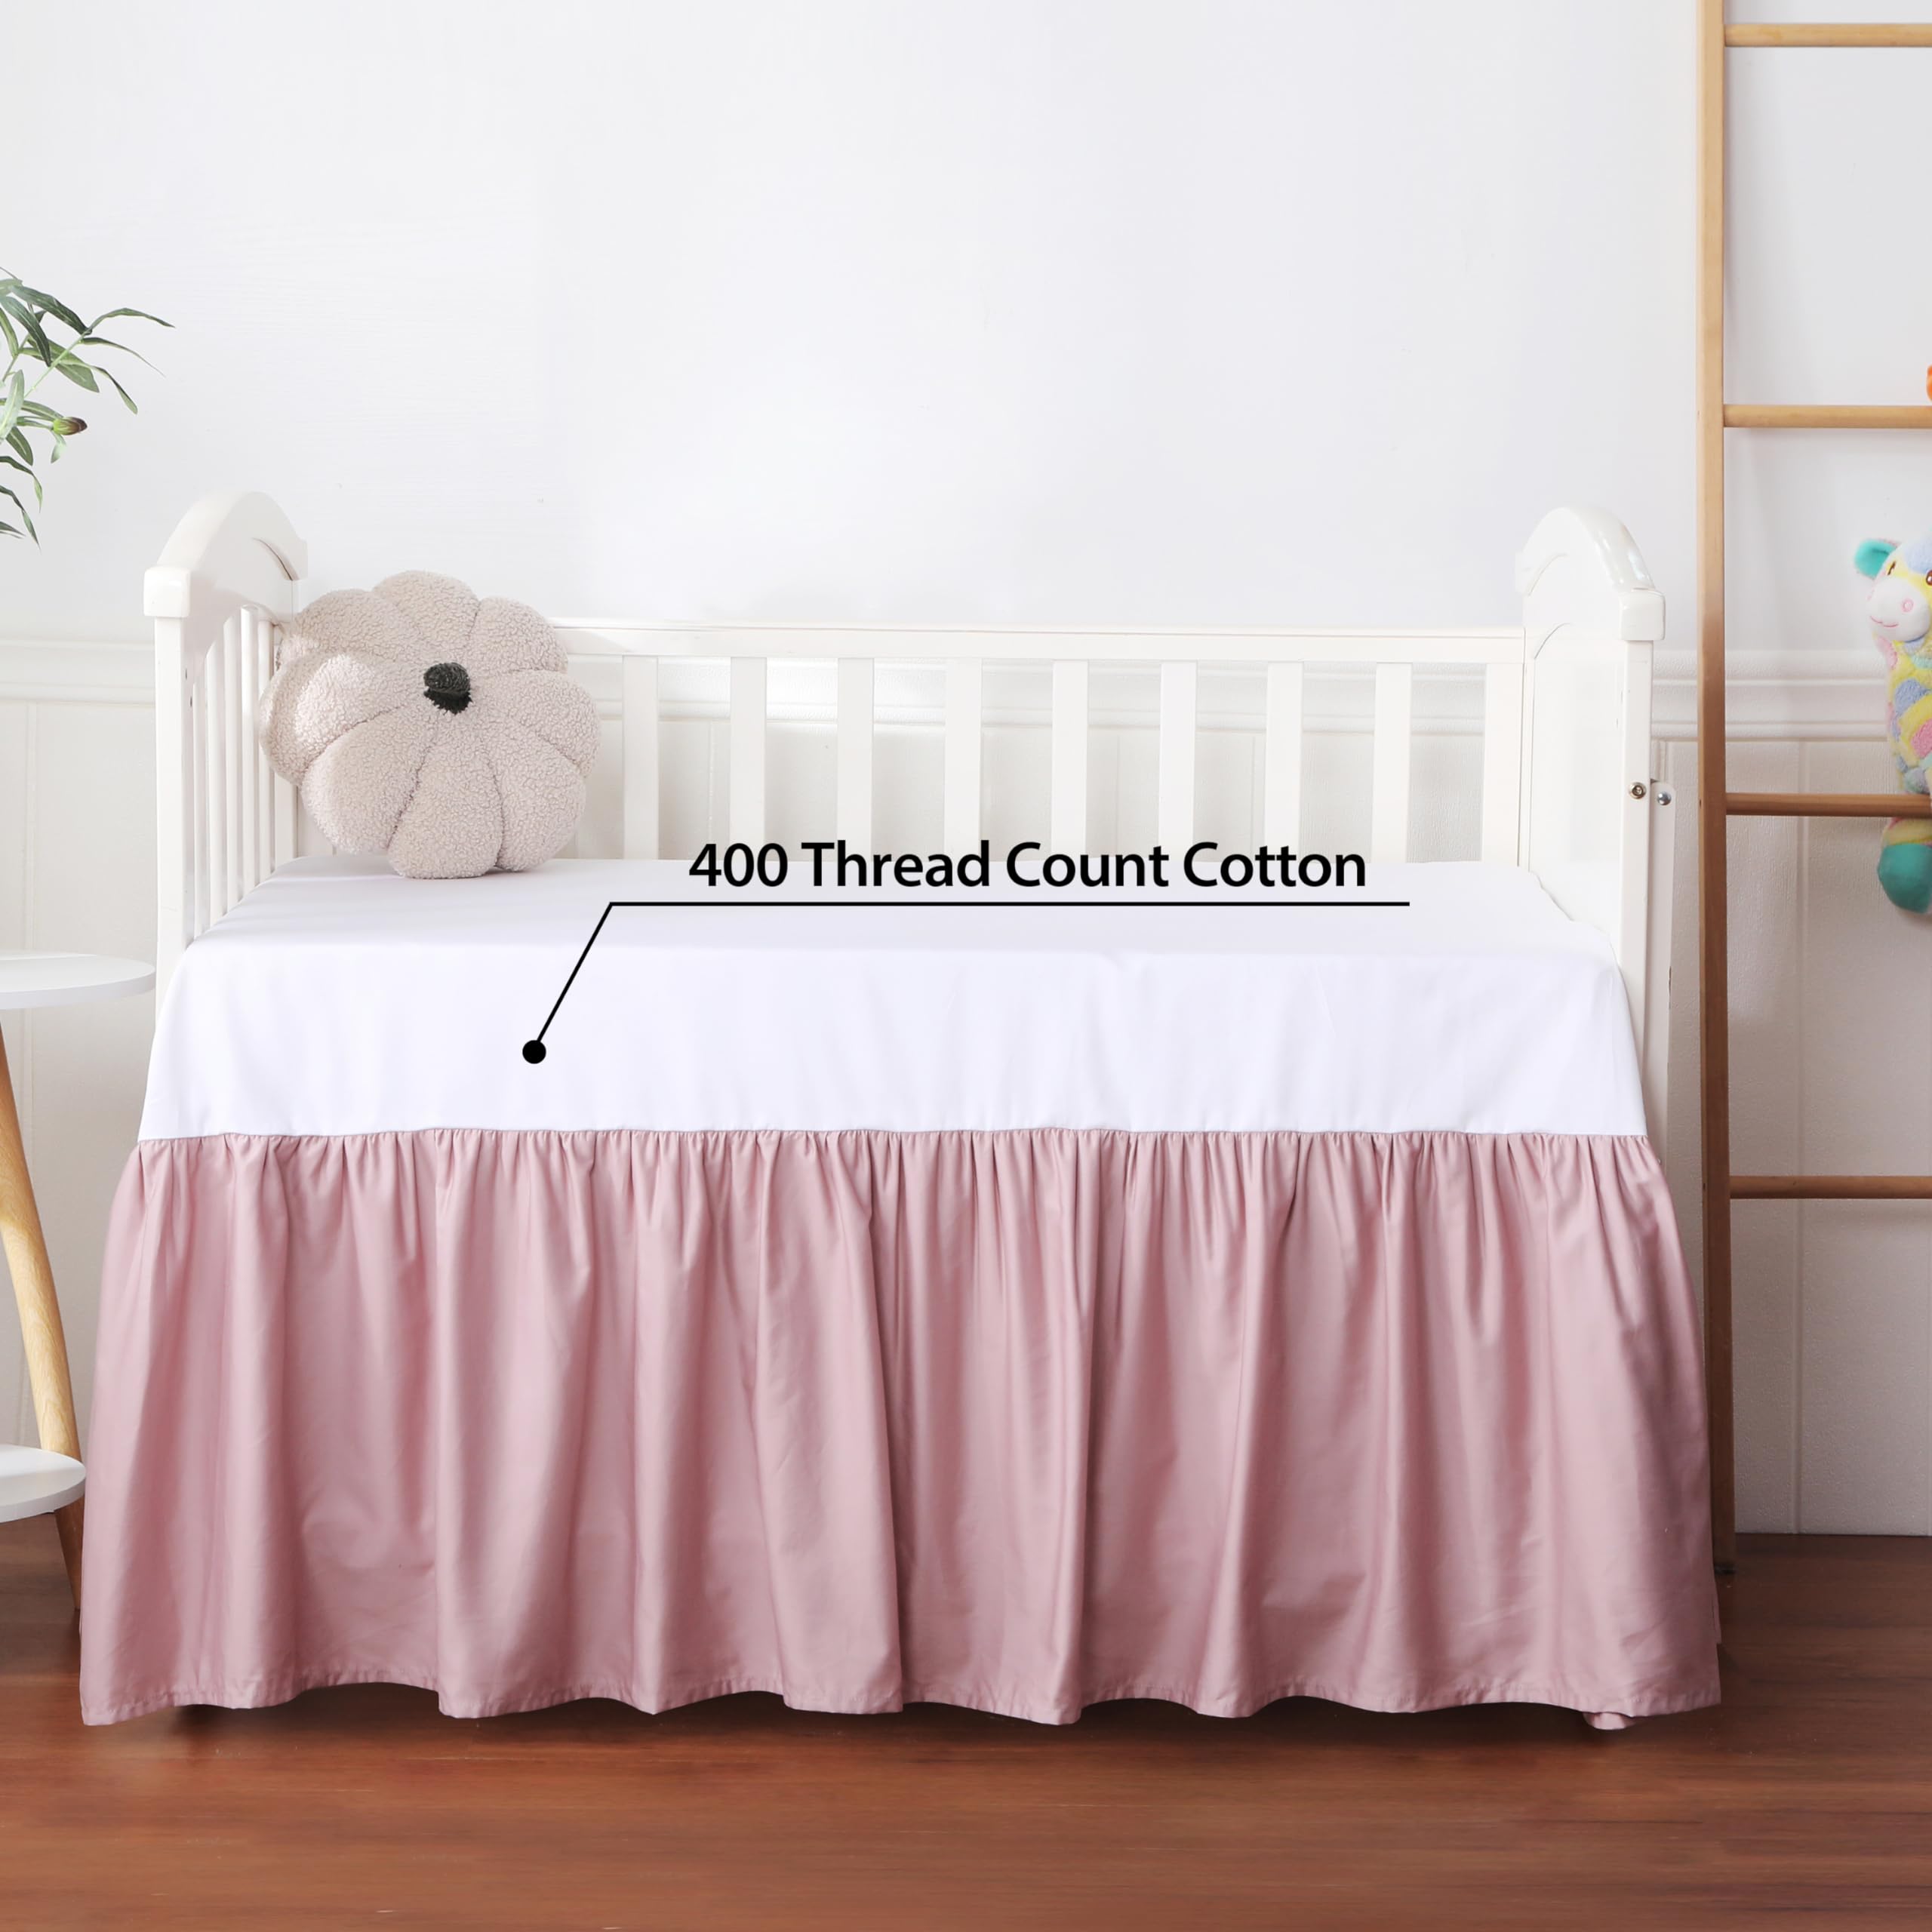 Crib Skirt Dust RuffleCrib Skirt Dust Ruffle, 100% Egyptian Cotton 400 Thread Count Soft Breathable Crib Bedding Skirt for Baby, Boys and Girls, Fading Resistant (Pink)